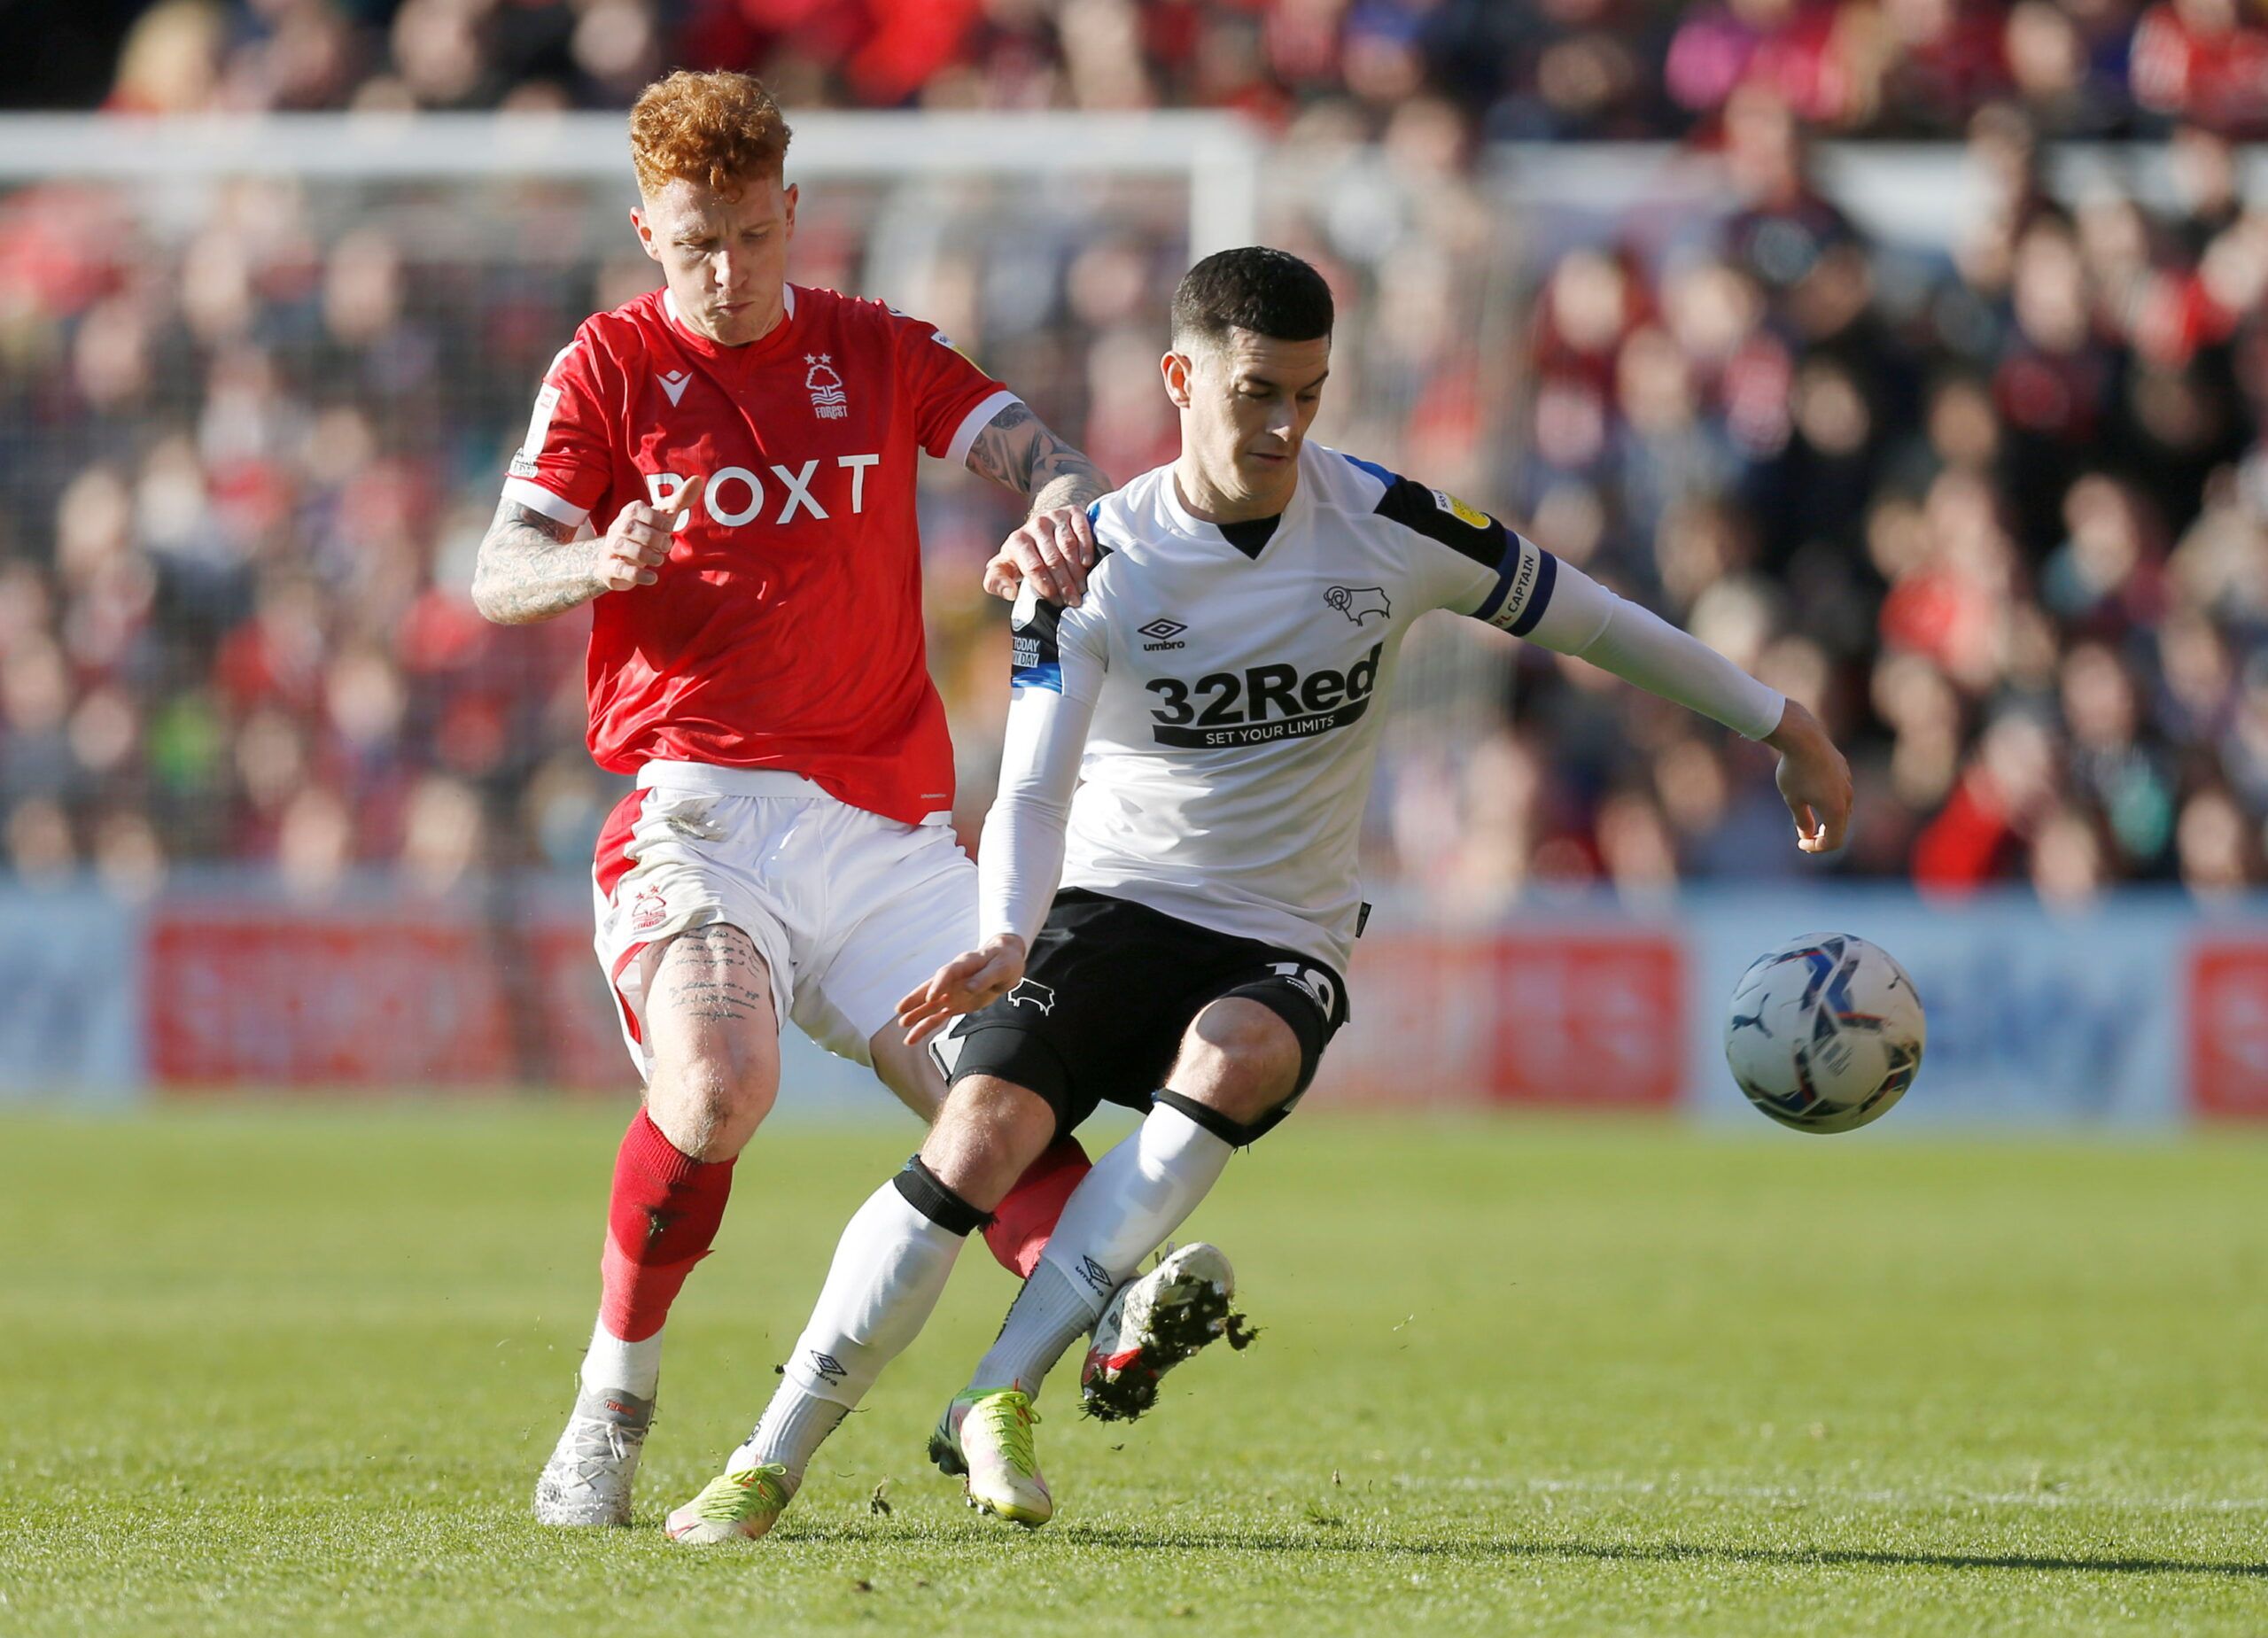 Soccer Football - Championship - Nottingham Forest v Derby County - The City Ground, Nottingham, Britain - January 22, 2022 Nottingham Forest's Jack Colback in action with Derby County's Tom Lawrence  Action Images/Ed Sykes  EDITORIAL USE ONLY. No use with unauthorized audio, video, data, fixture lists, club/league logos or 